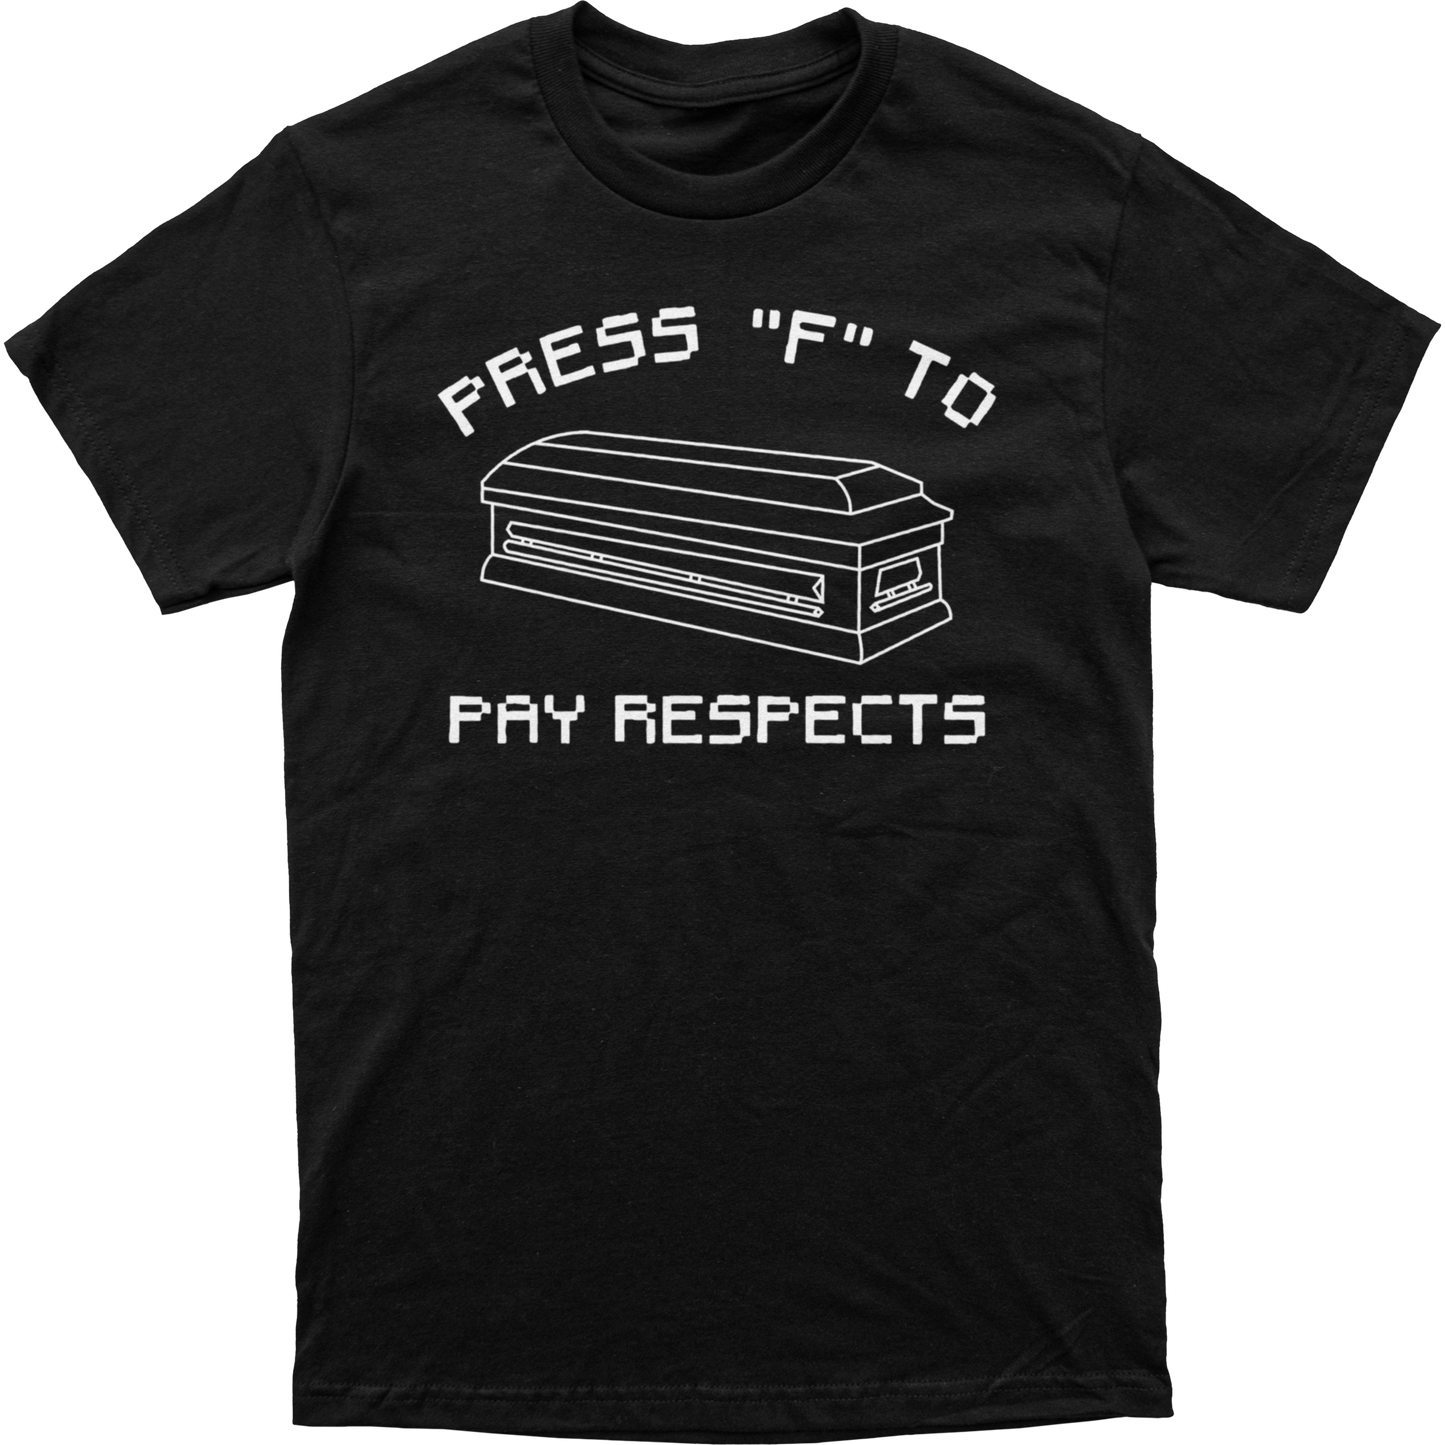 Press "F" To Pay Respects Tee